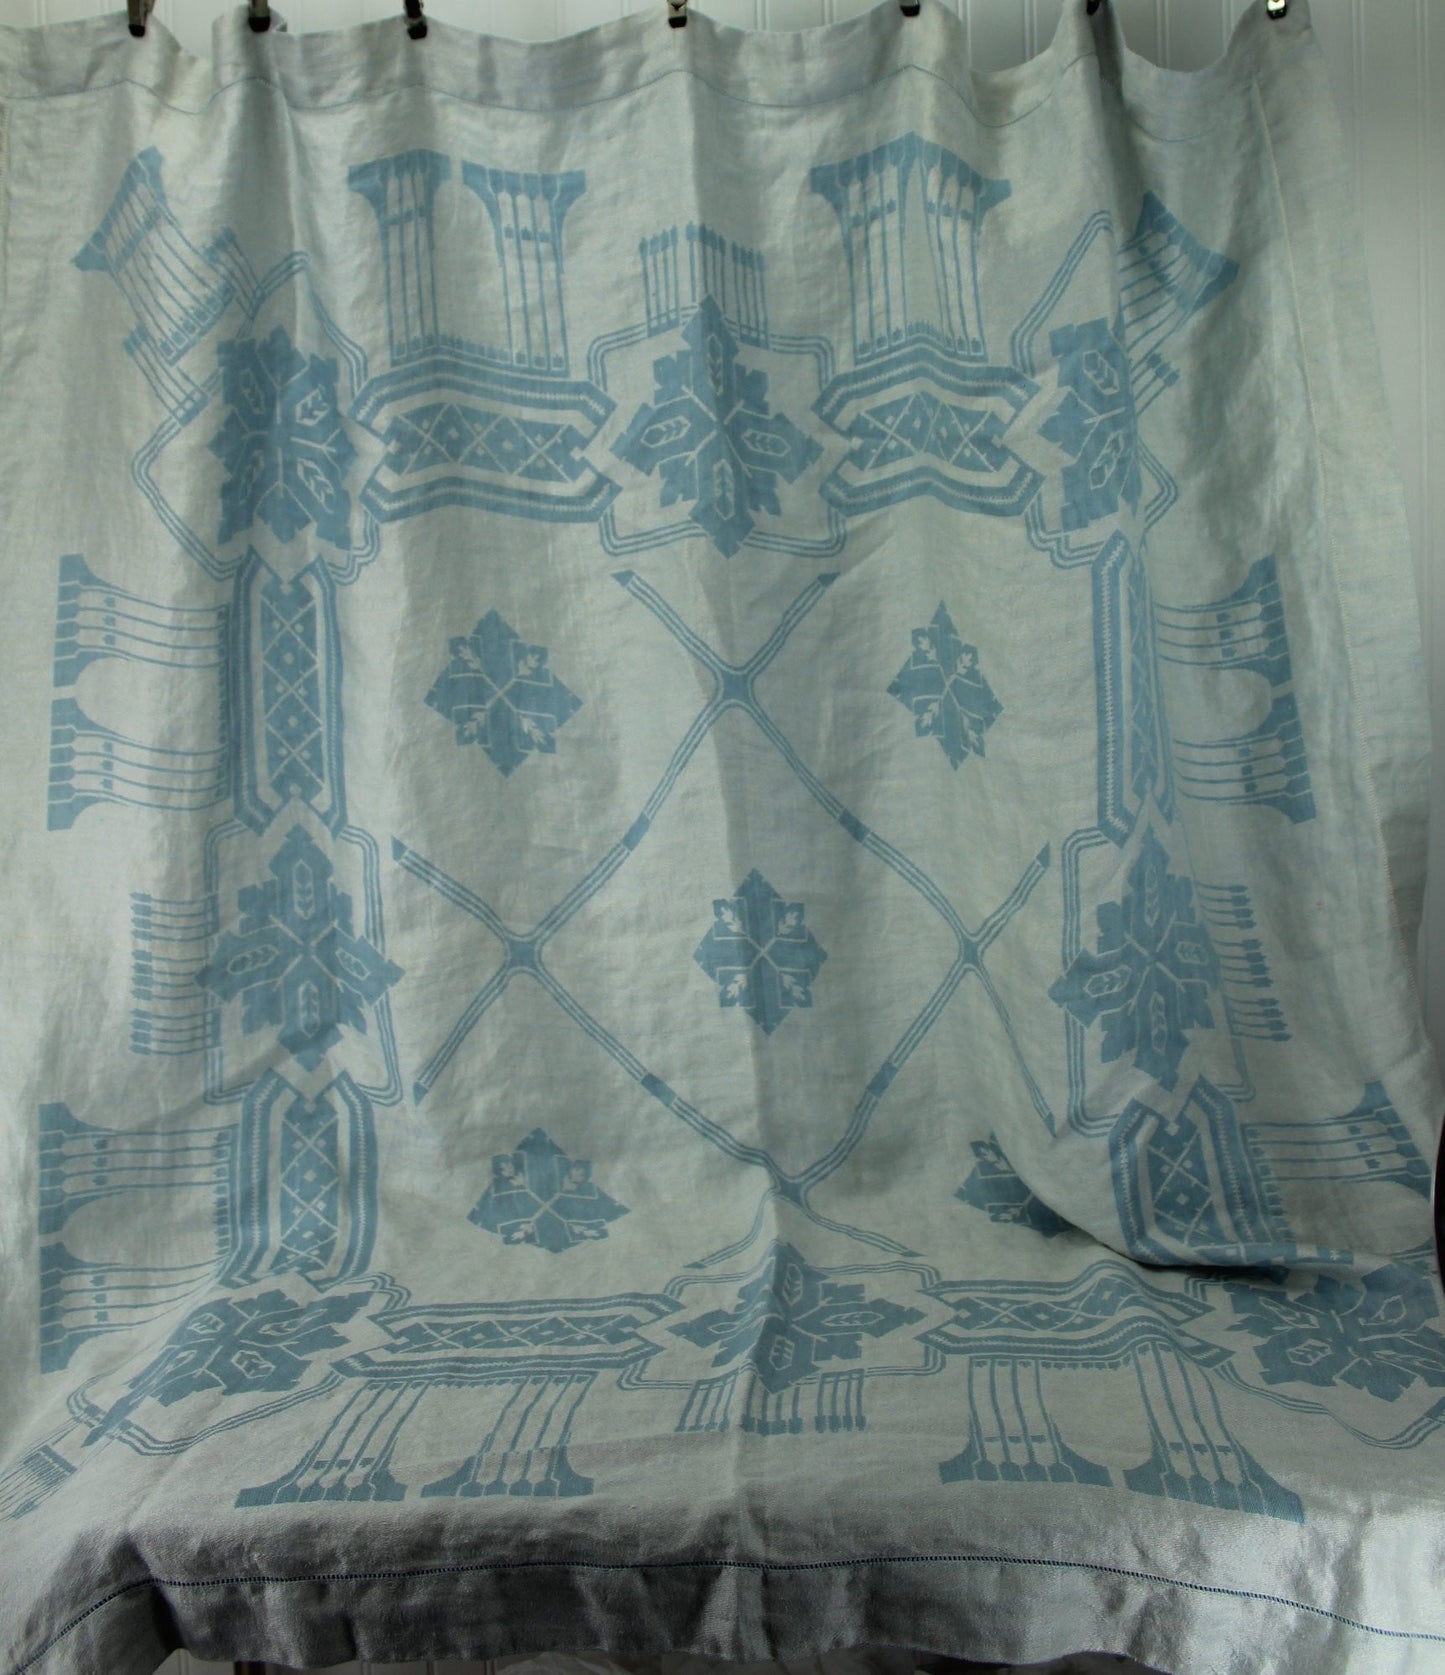 Blue Woven Tablecloth - 6 Matching Napkins - Fantastic Vintage Fabric lovely small cloth